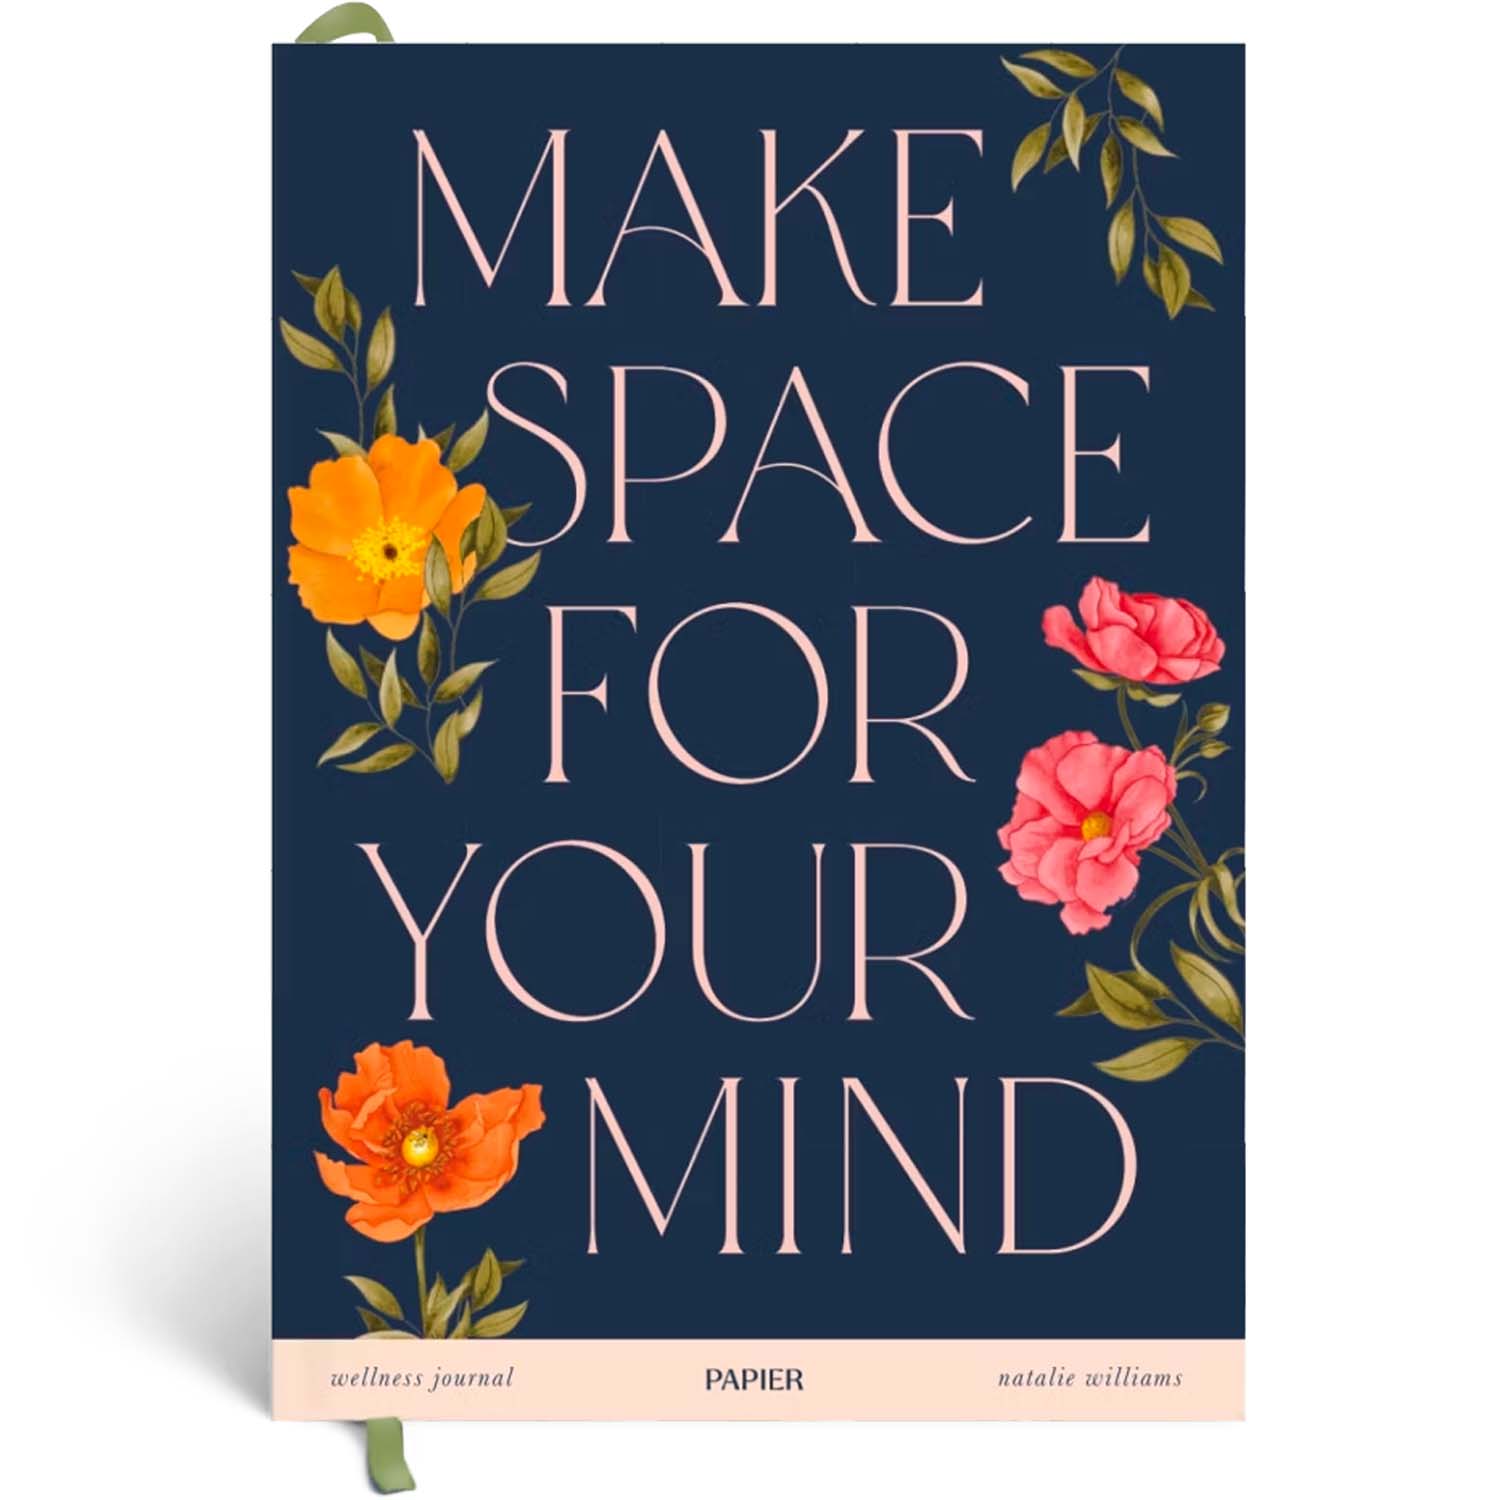 wellness journal saying 'make space for your mind' from papier